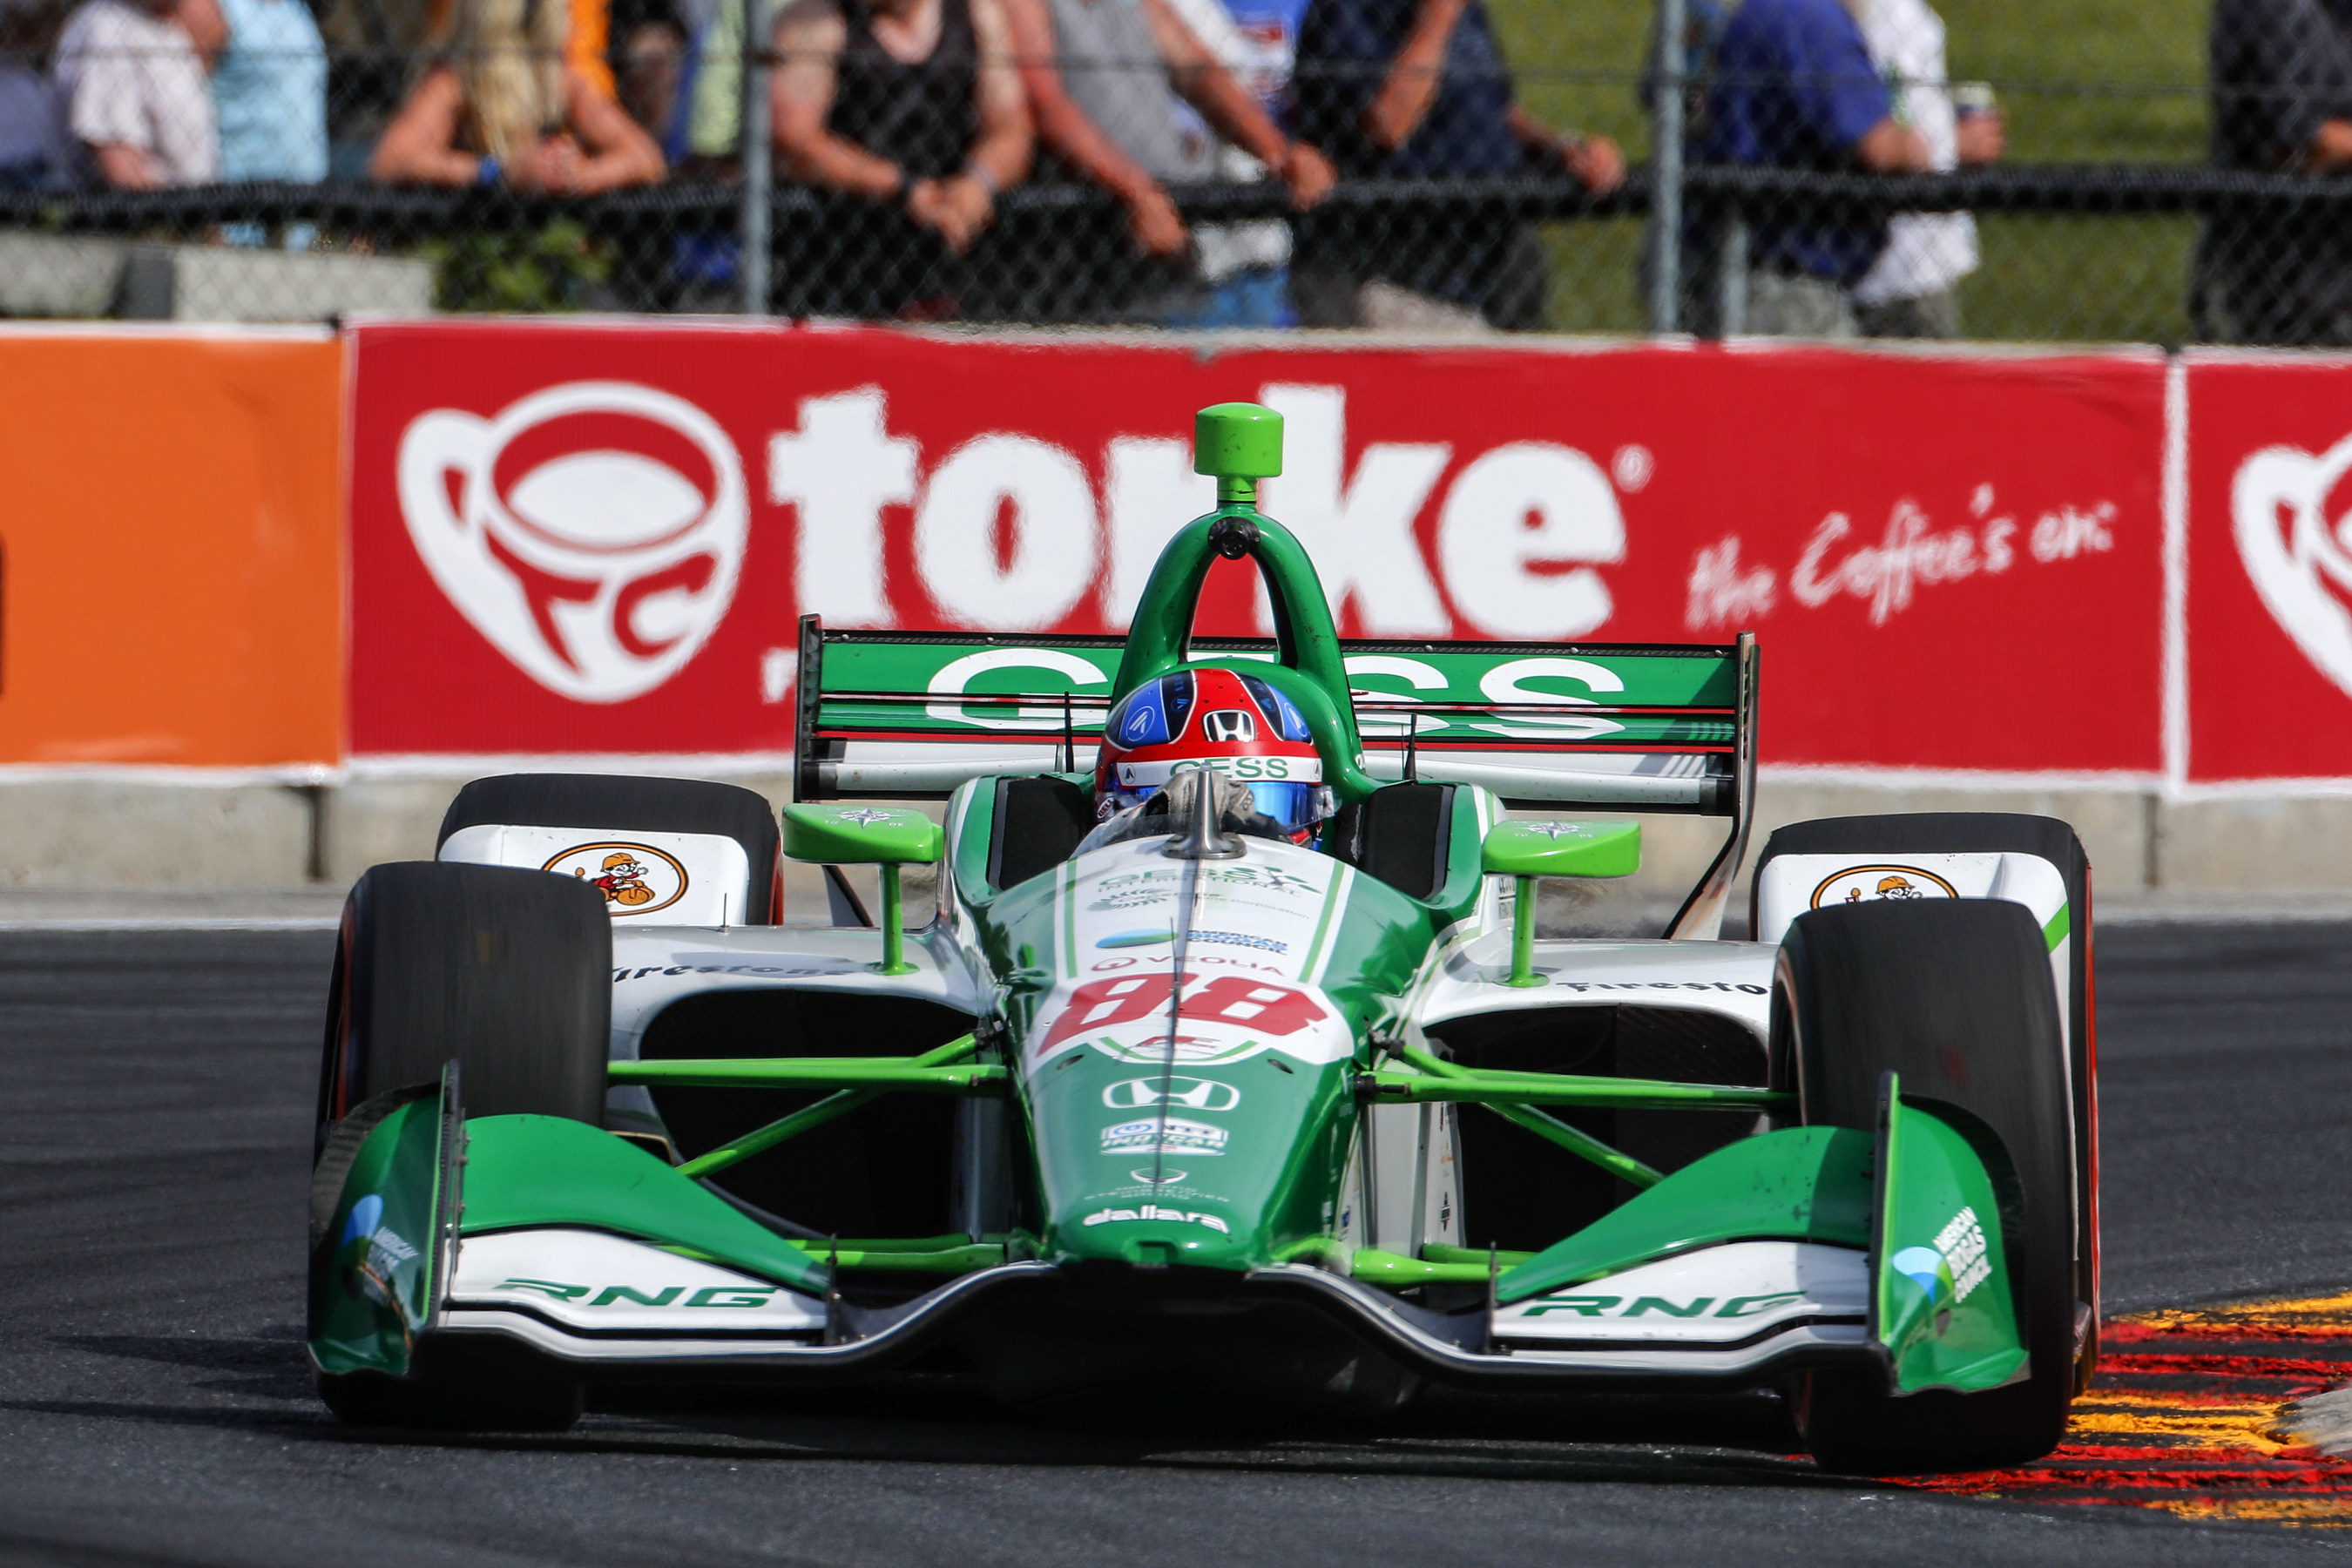 Herta, Rossi Sweep Front Row for Honda in Road America Qualifying